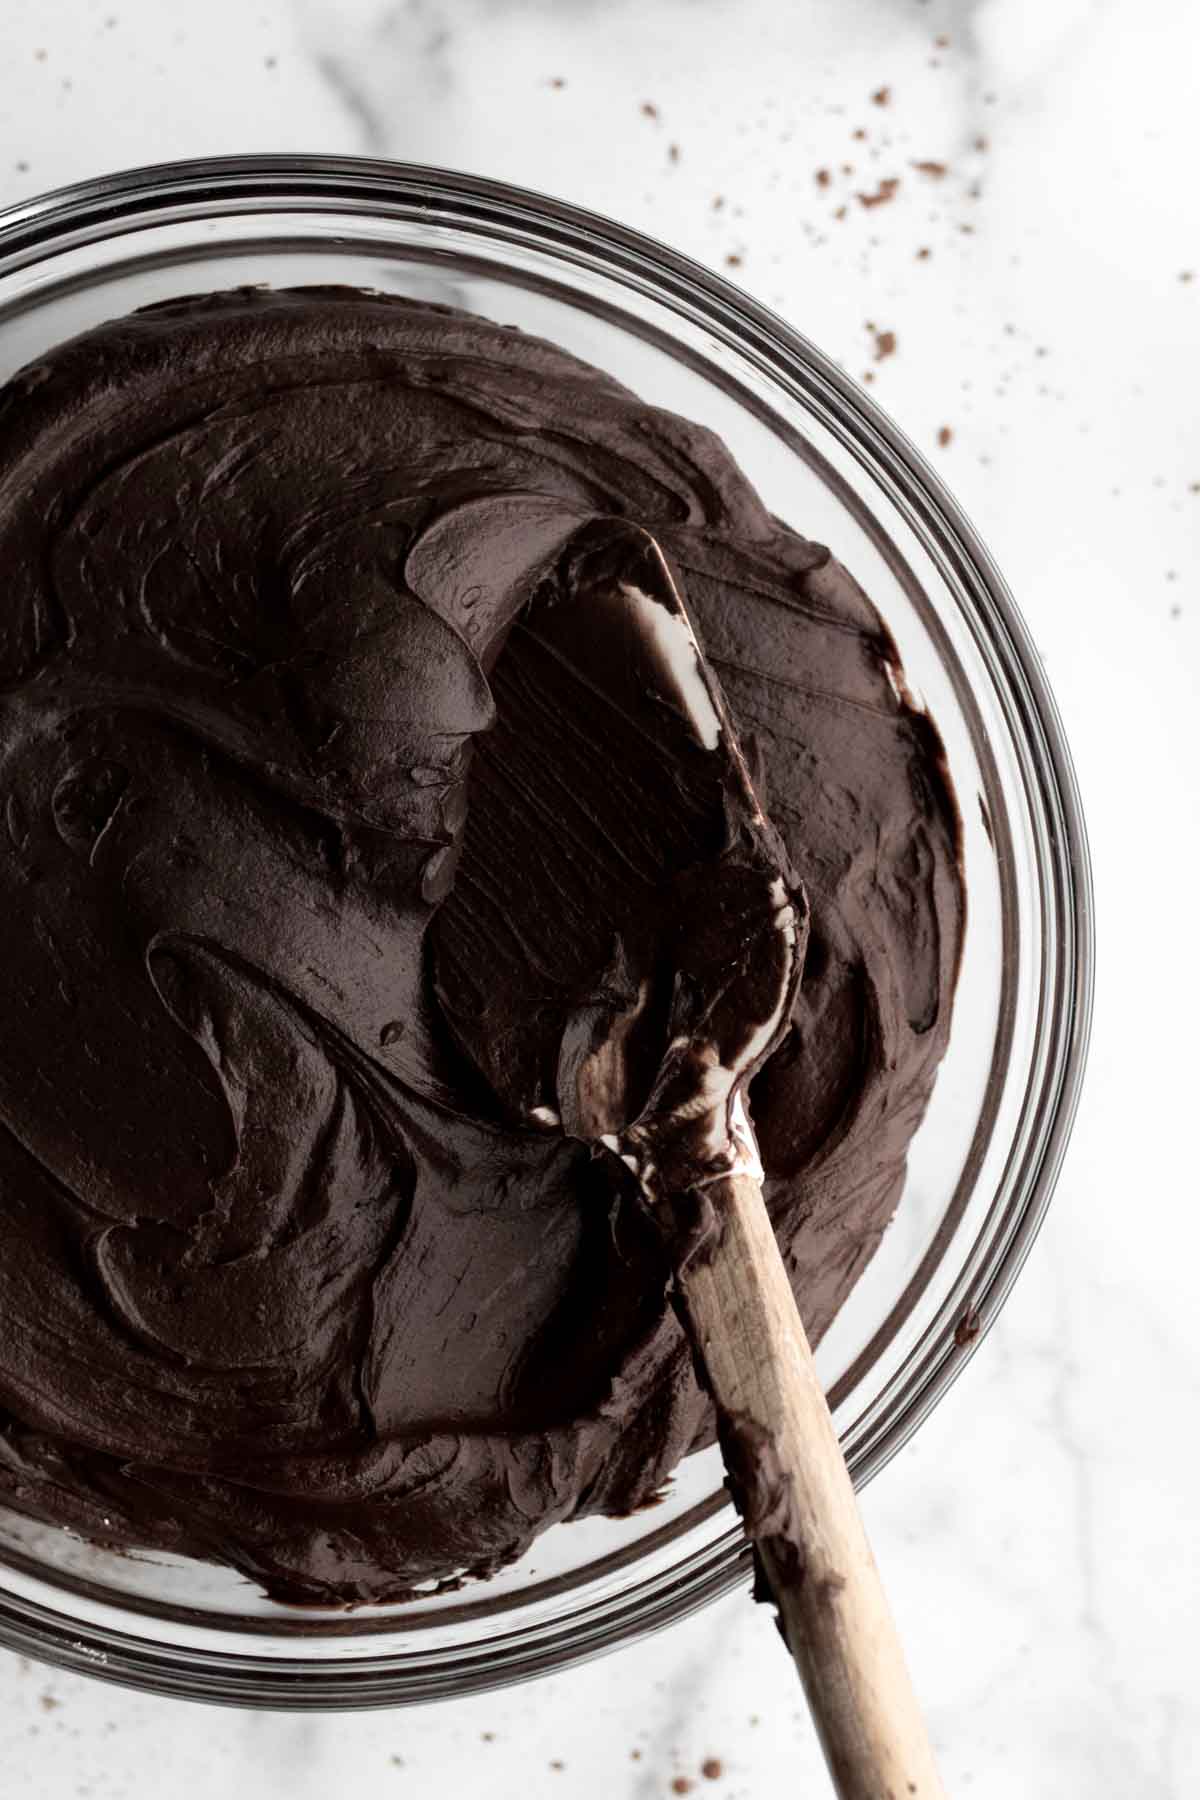 A closer look at the chocolate frosting in a bowl.